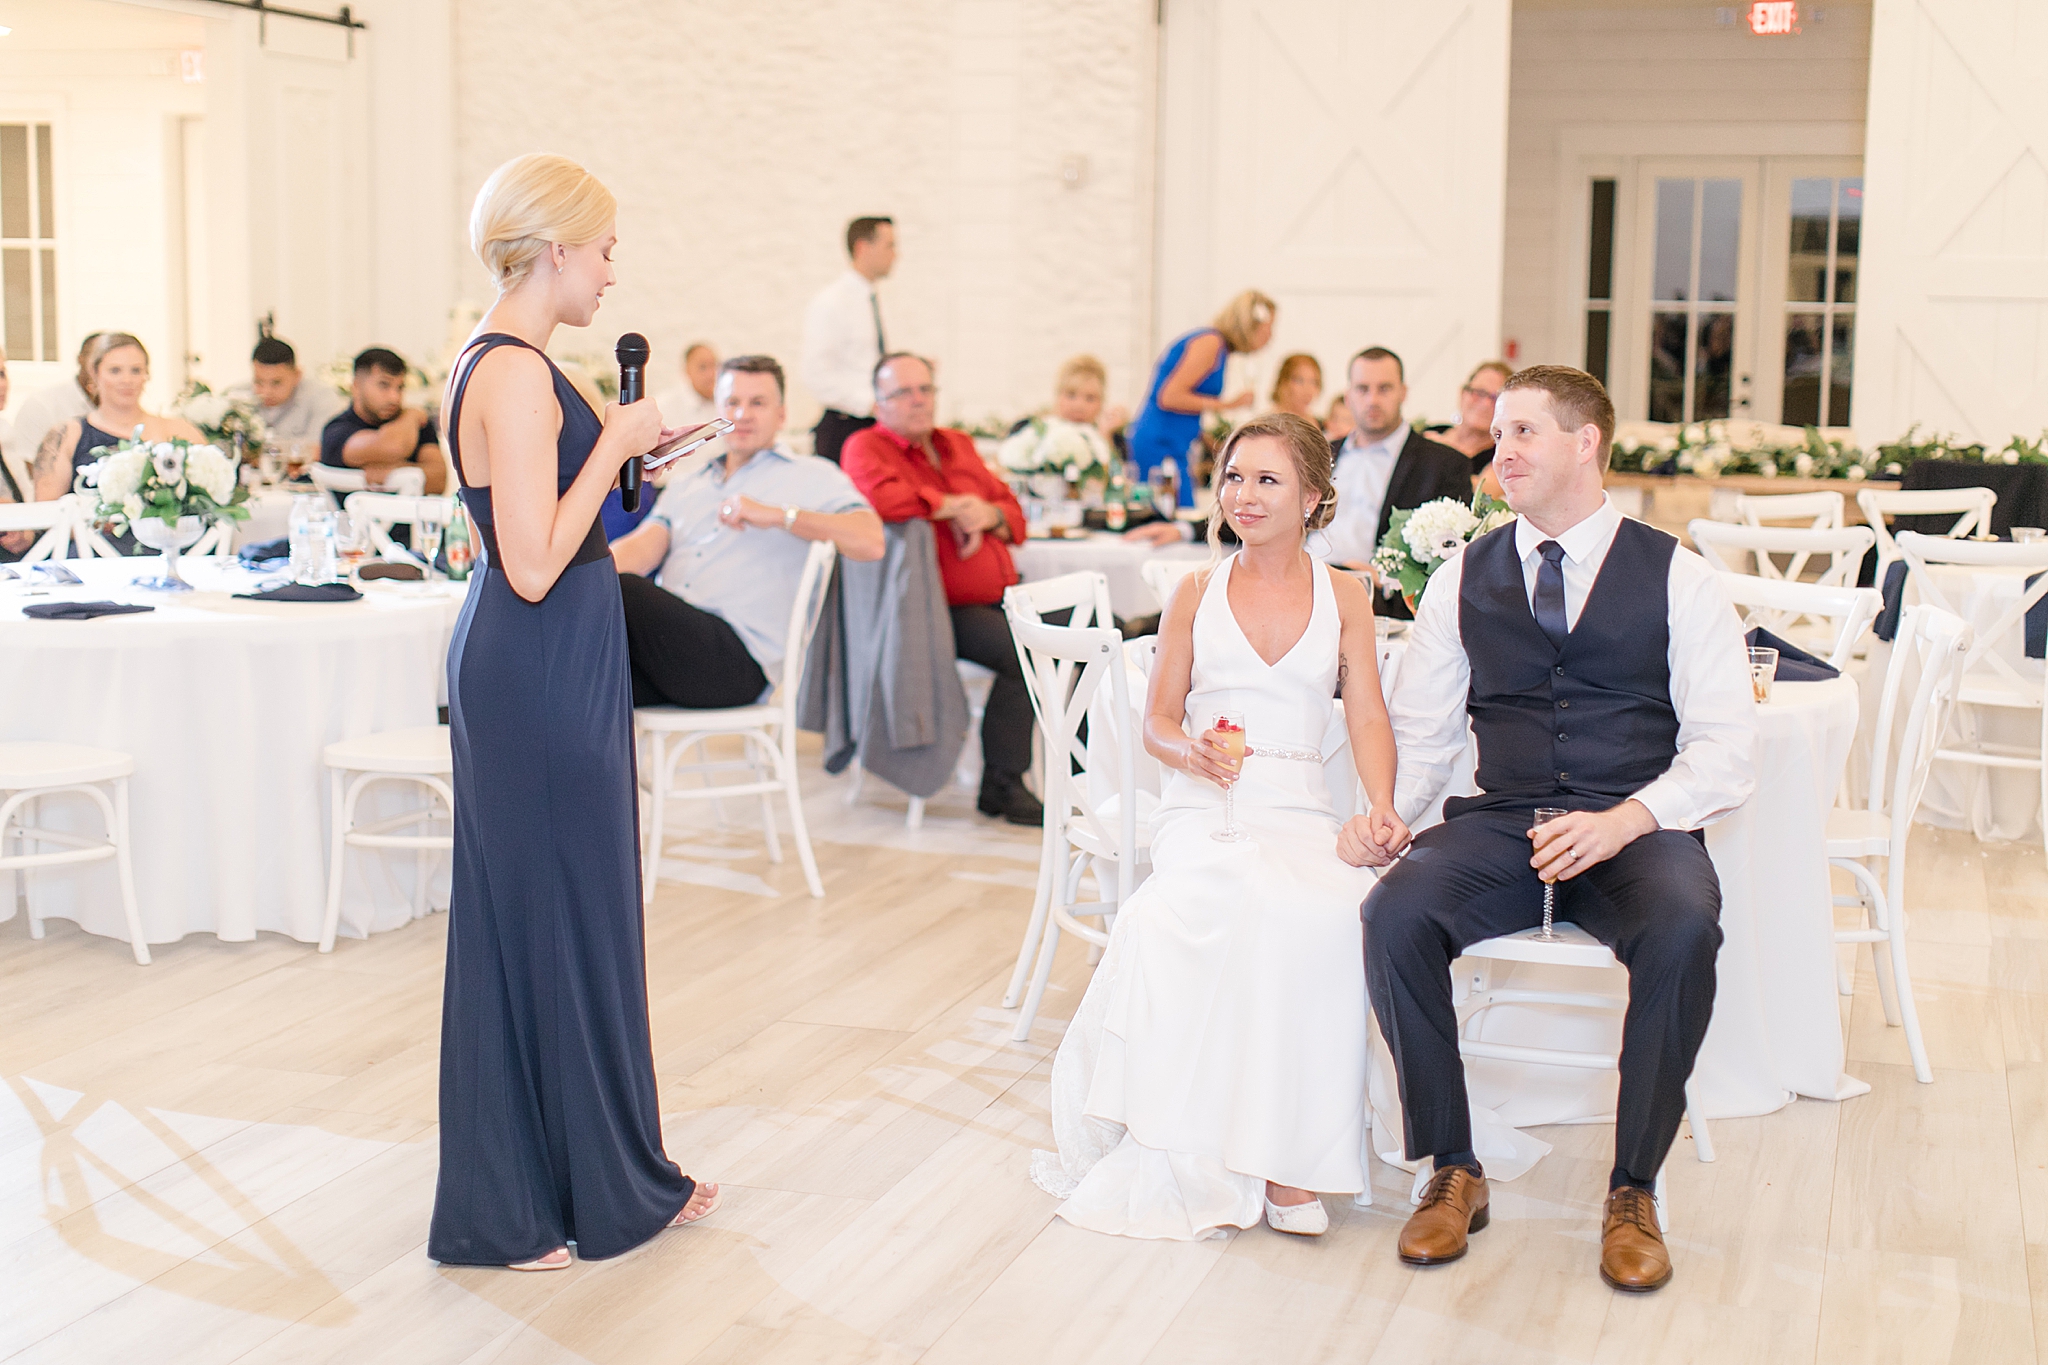 maid of honor gives to toast to newlyweds